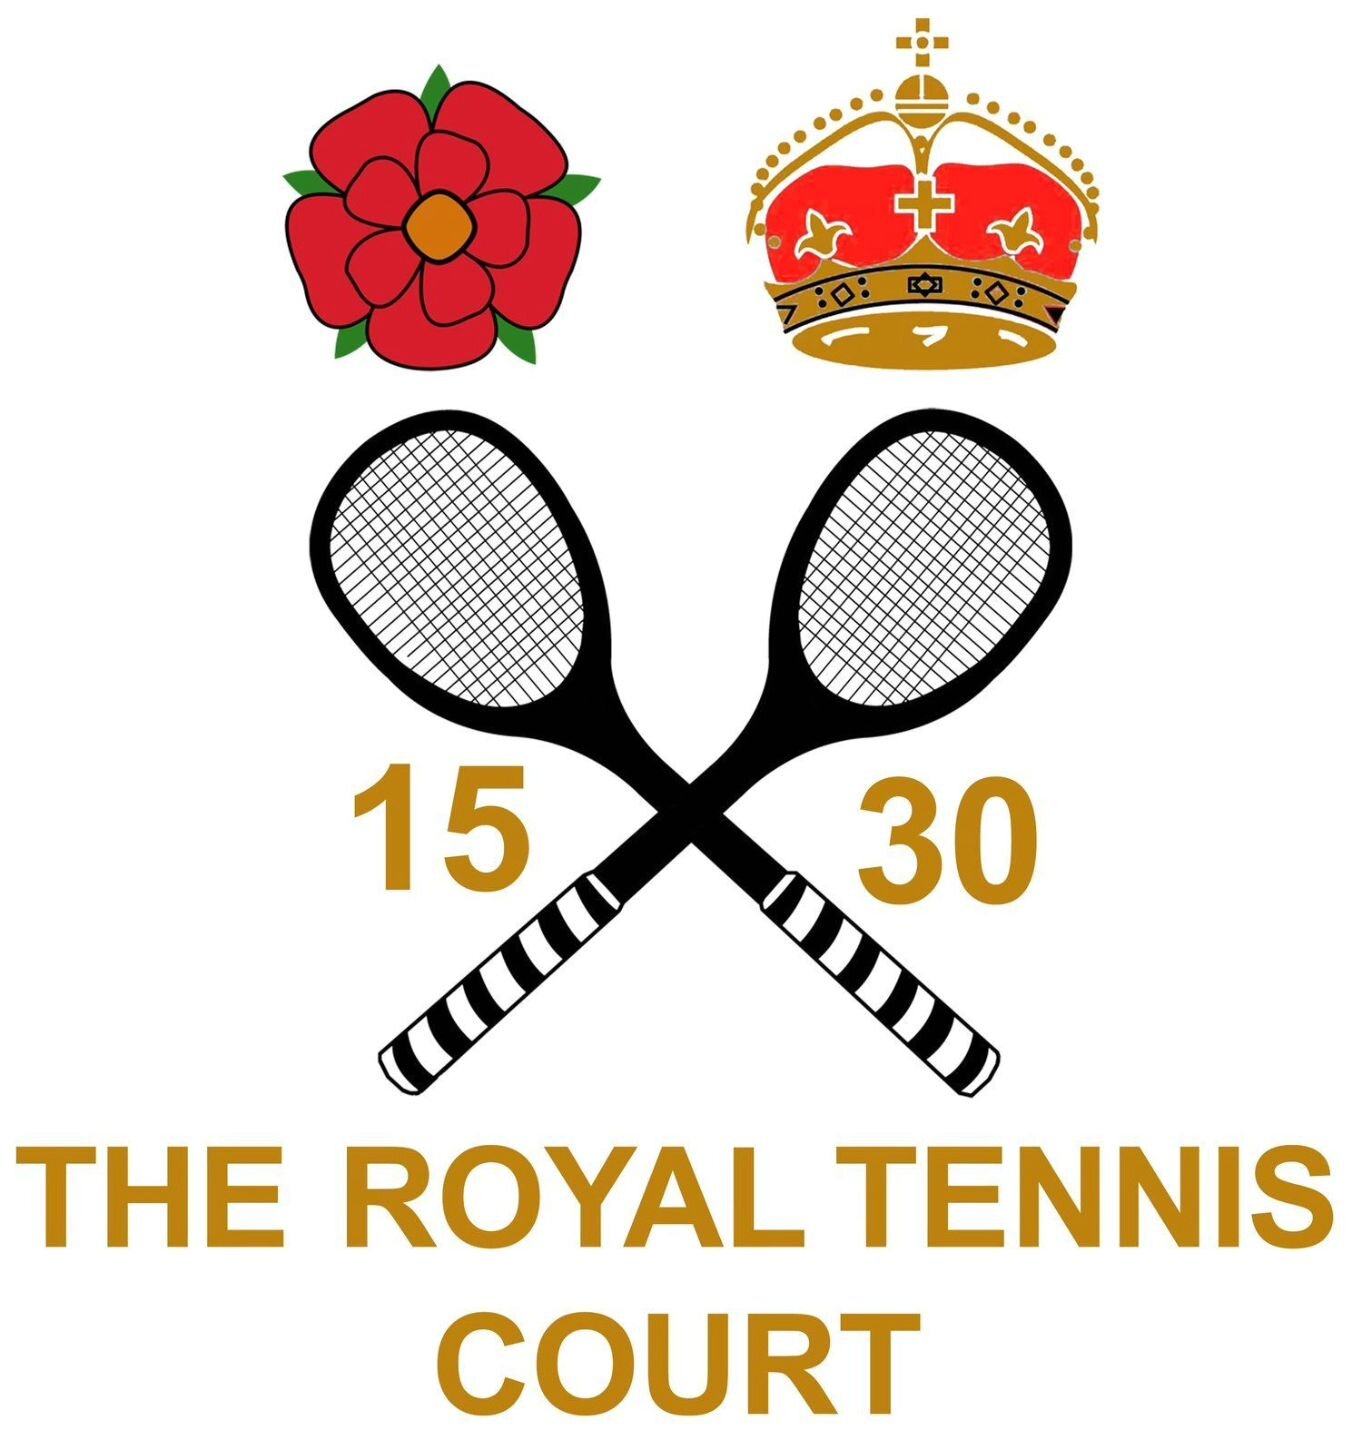 Dates for your diary at the RTC - for more information buff.ly/3qbxqBU 
6th-8th May - World Masters 2024 - Cockram O50s 
19th-21st April - RTC Handicap Doubles
27th-30th June - King's Goblet - RTC Open Handicap Doubles
28th July - 4th August - Champi